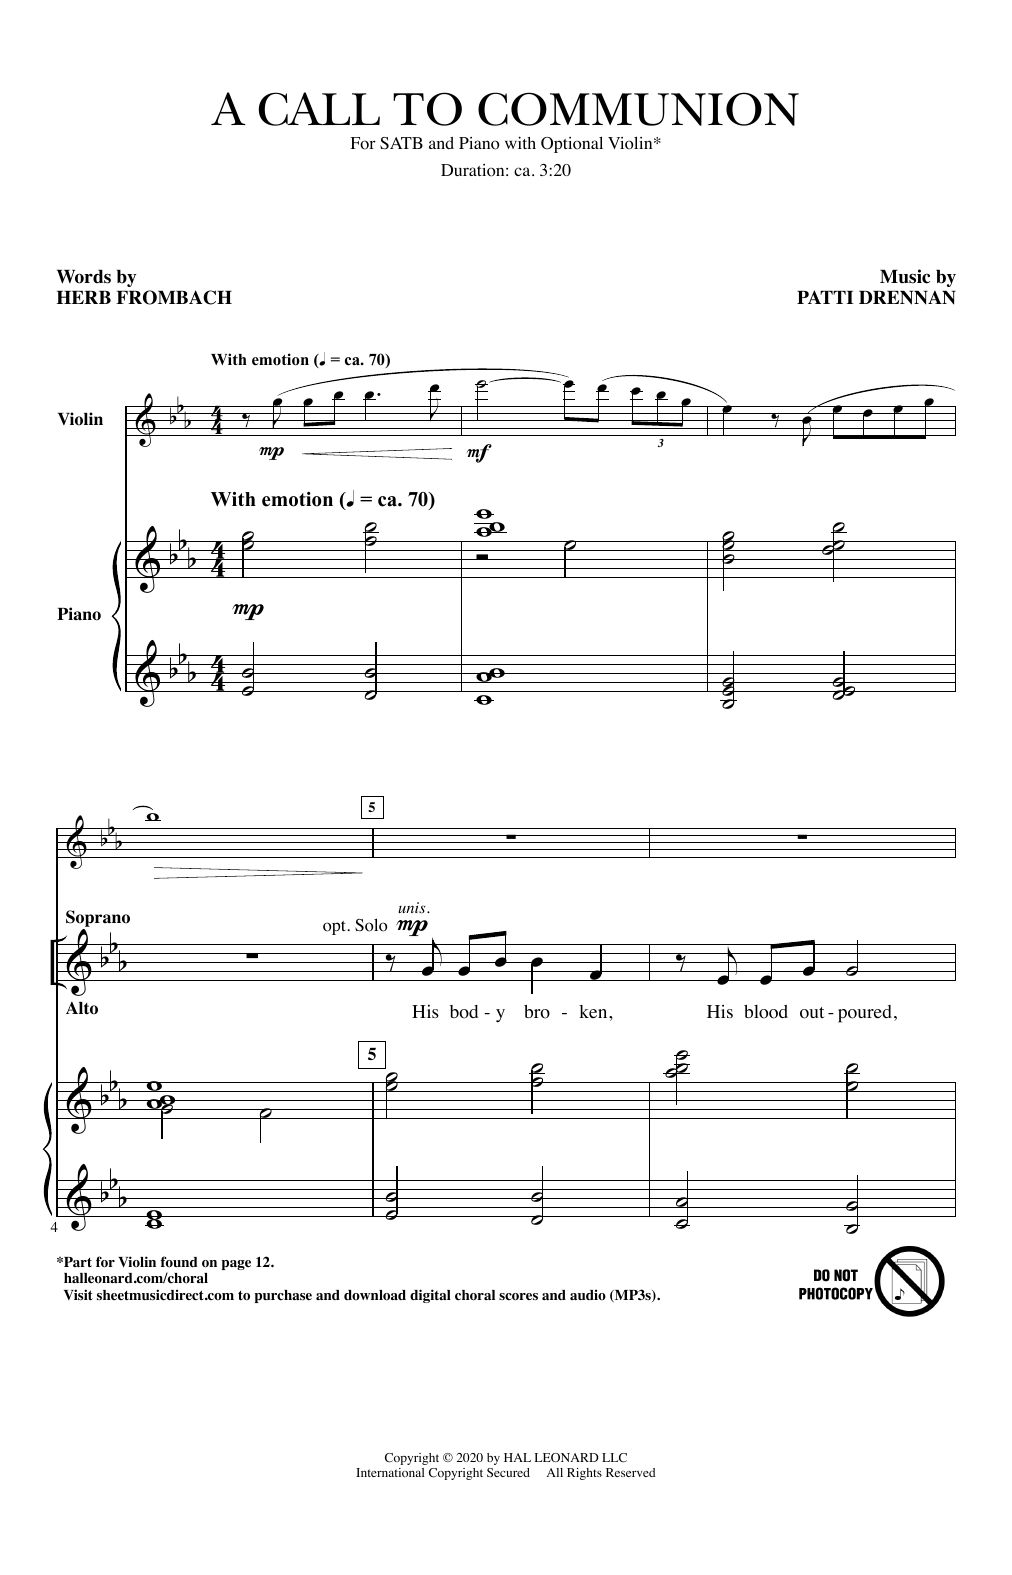 Download Herb Frombach and Patti Drennan A Call To Communion Sheet Music